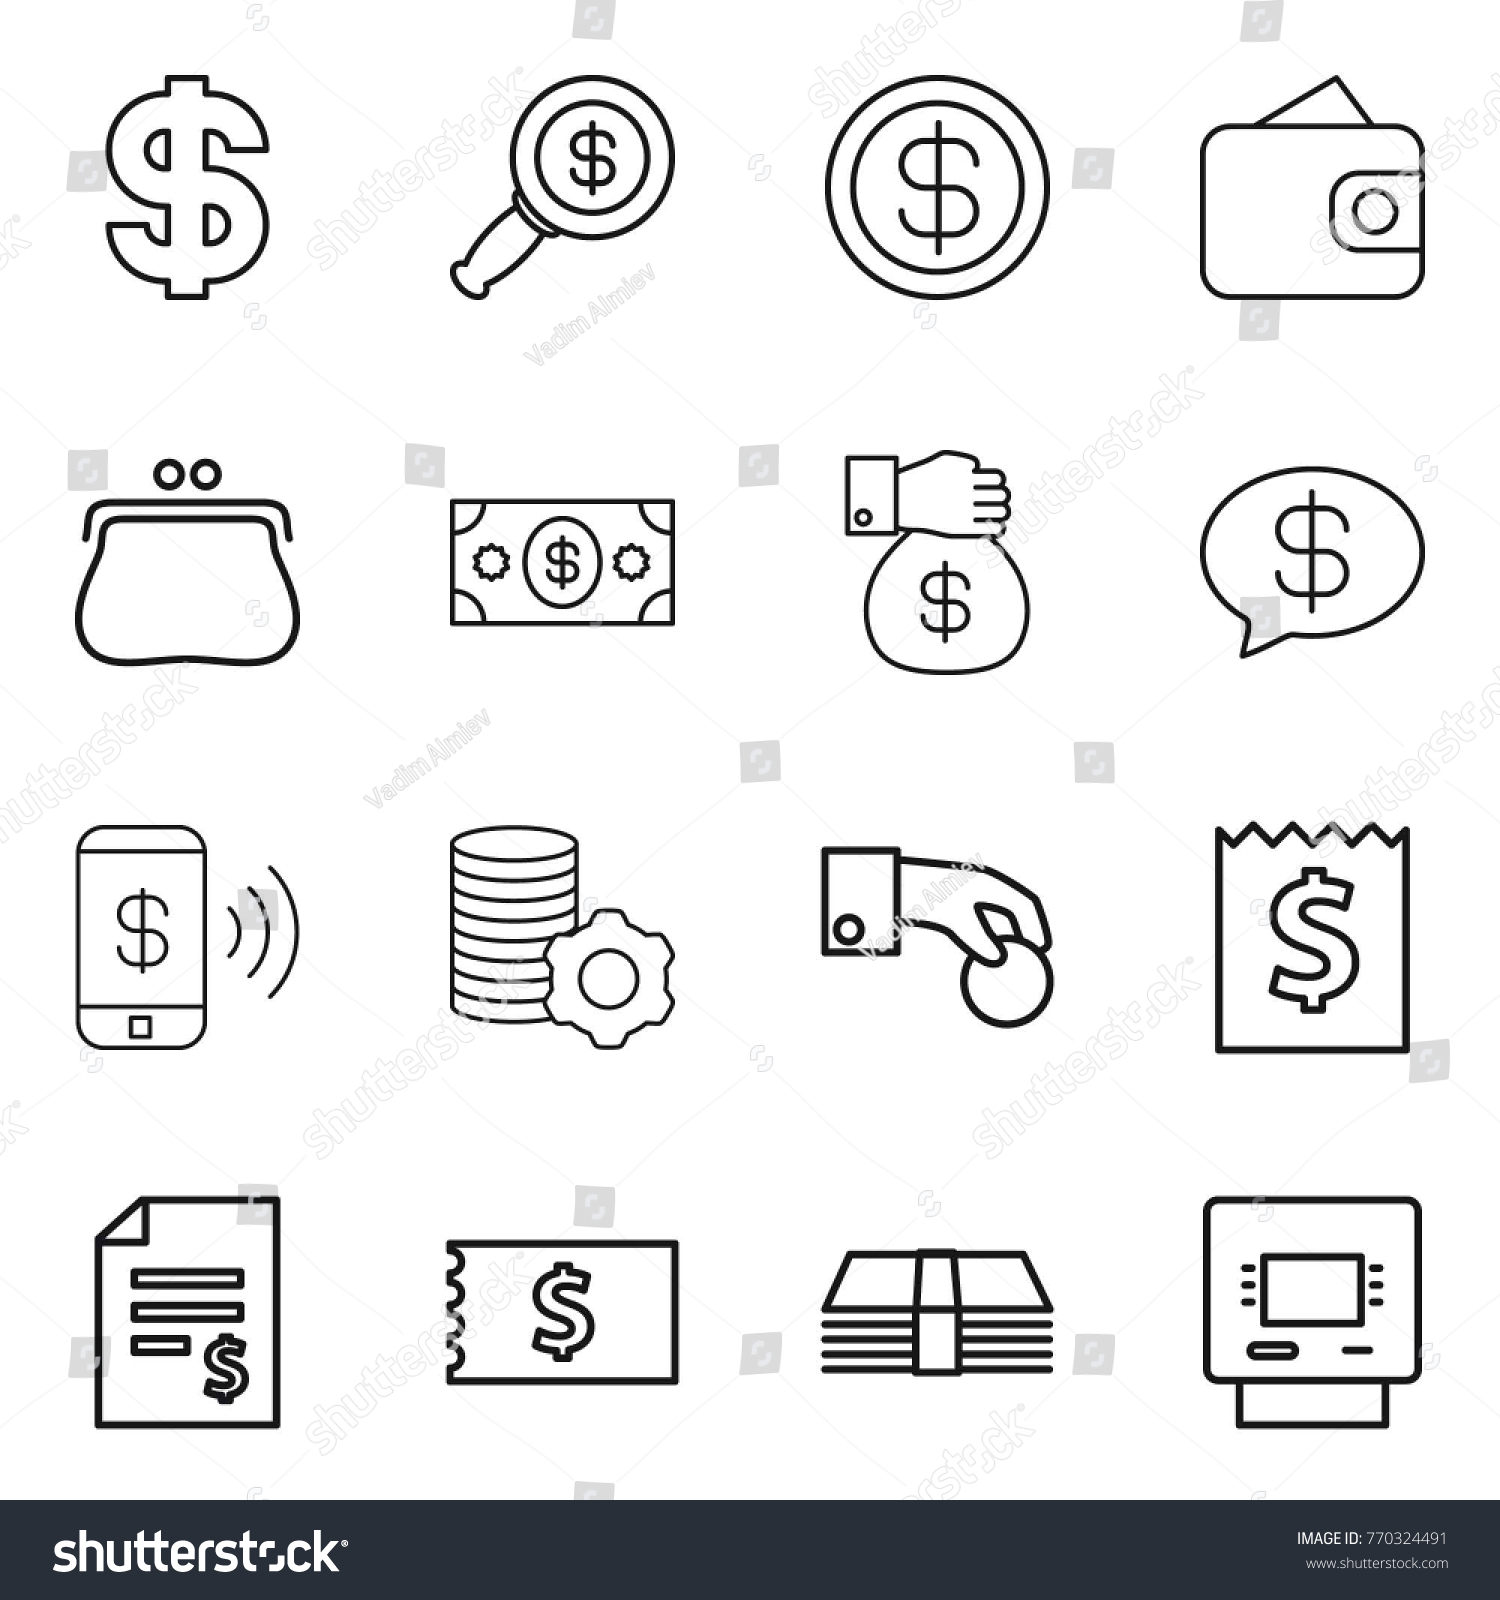 Thin line icon set : dollar, magnifier, wallet, purse, money, gift, message, phone pay, virtual mining, hand coin, receipt, account balance, atm #770324491